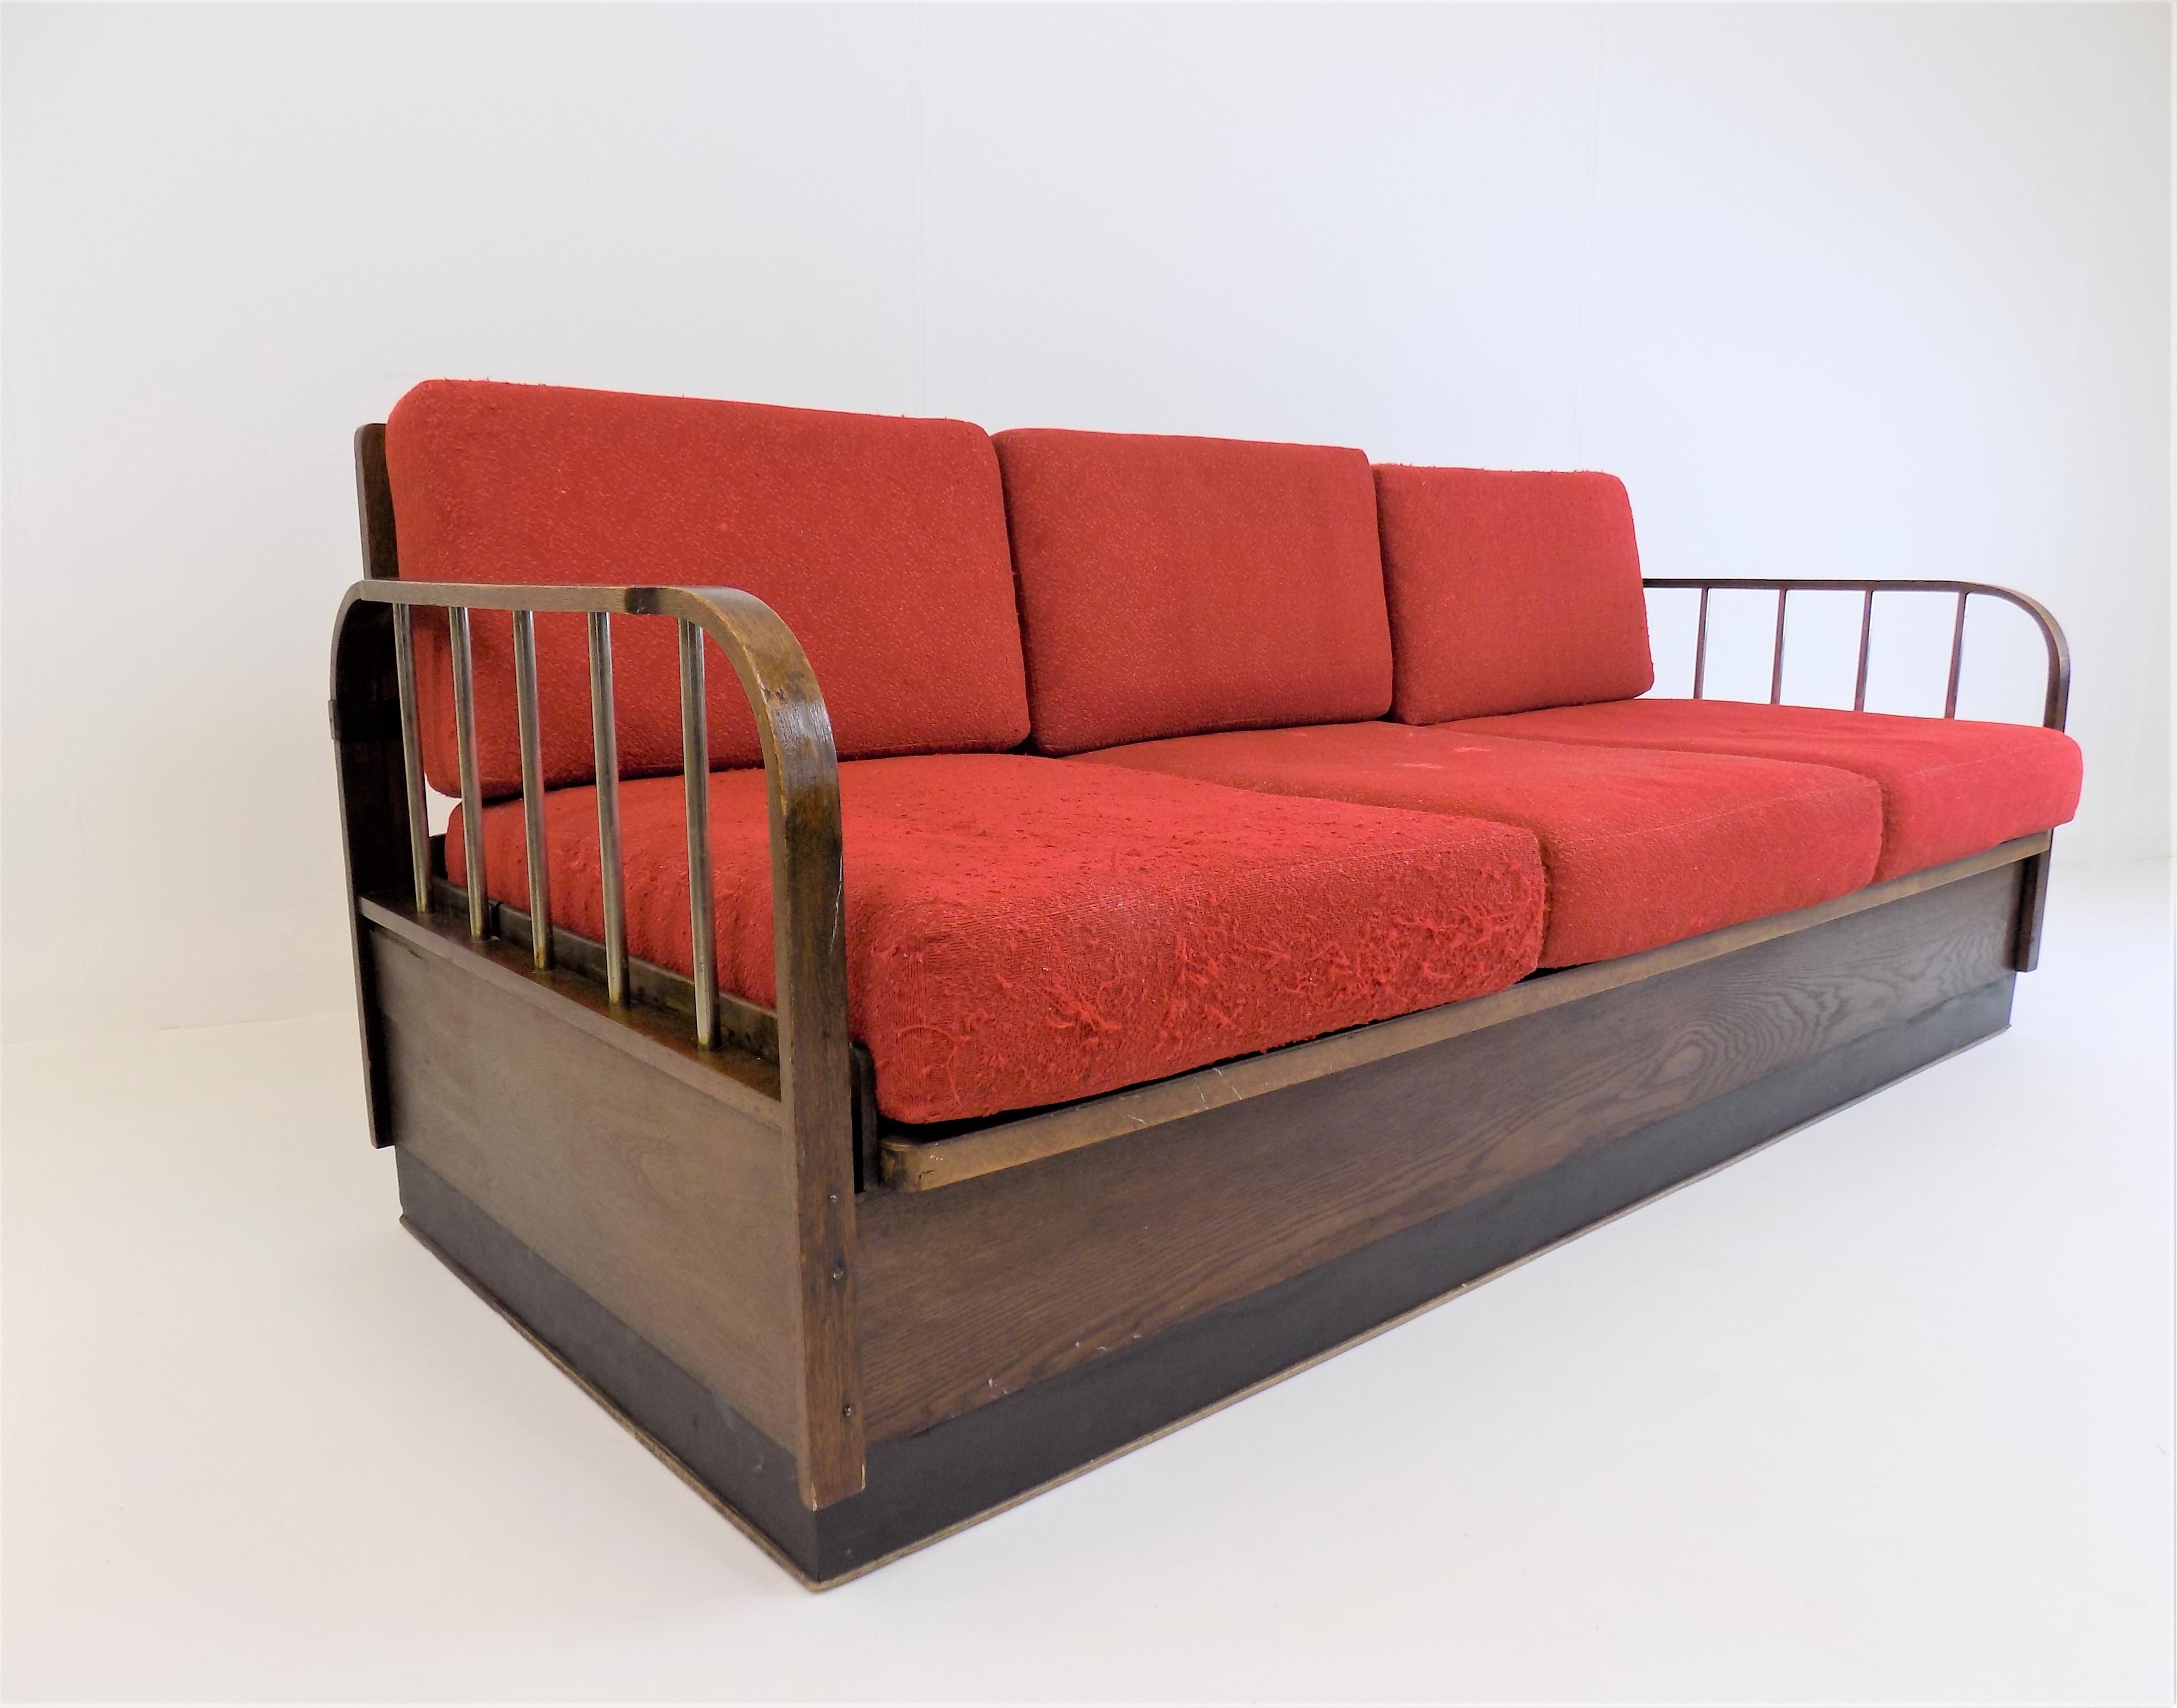 This classic of Bauhaus and Czech functionalism is in good condition. The oak frame shows slight signs of wear. The side panels on this model are finished with chrome bars which have an attractive patina. The bottom of the sofa under the seat